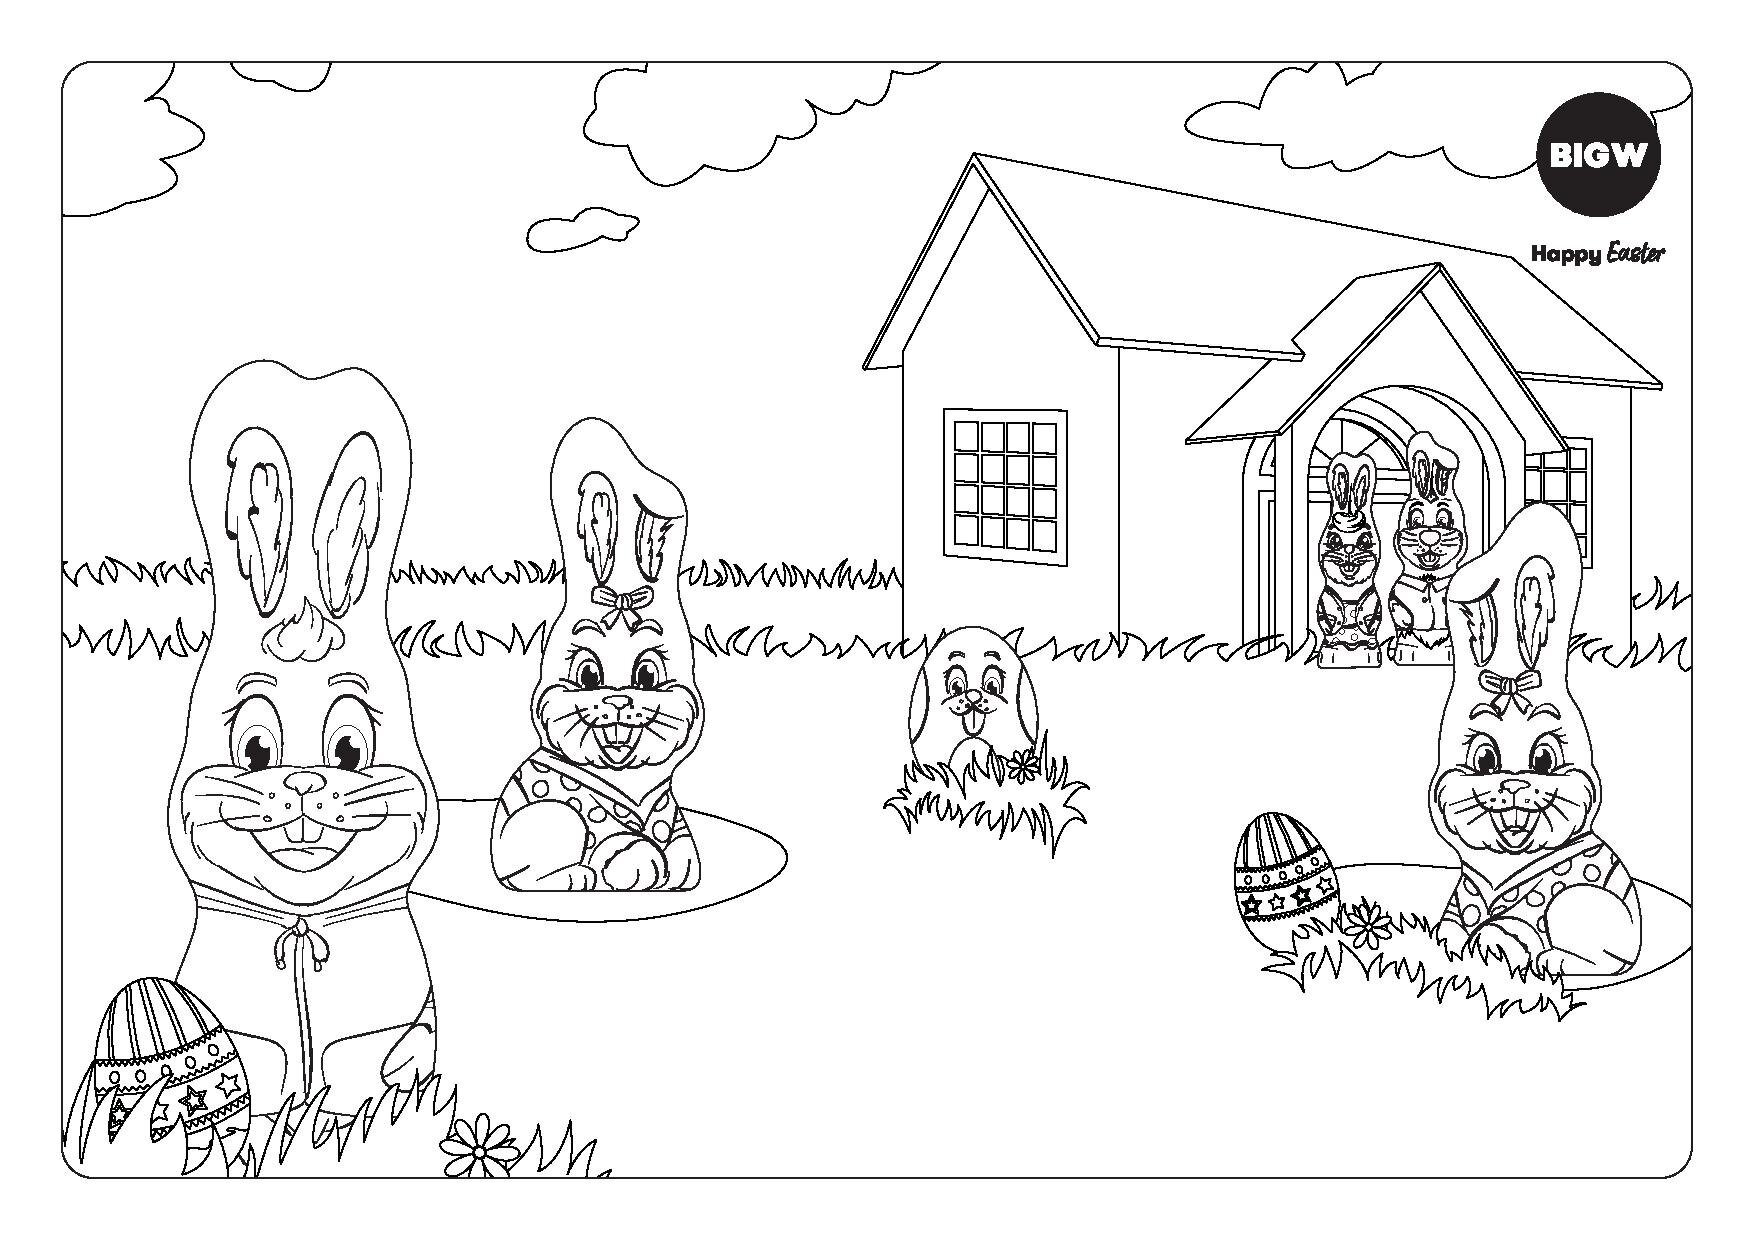 BIGW_ColouringBookA4_Approved 2-page-001.jpg